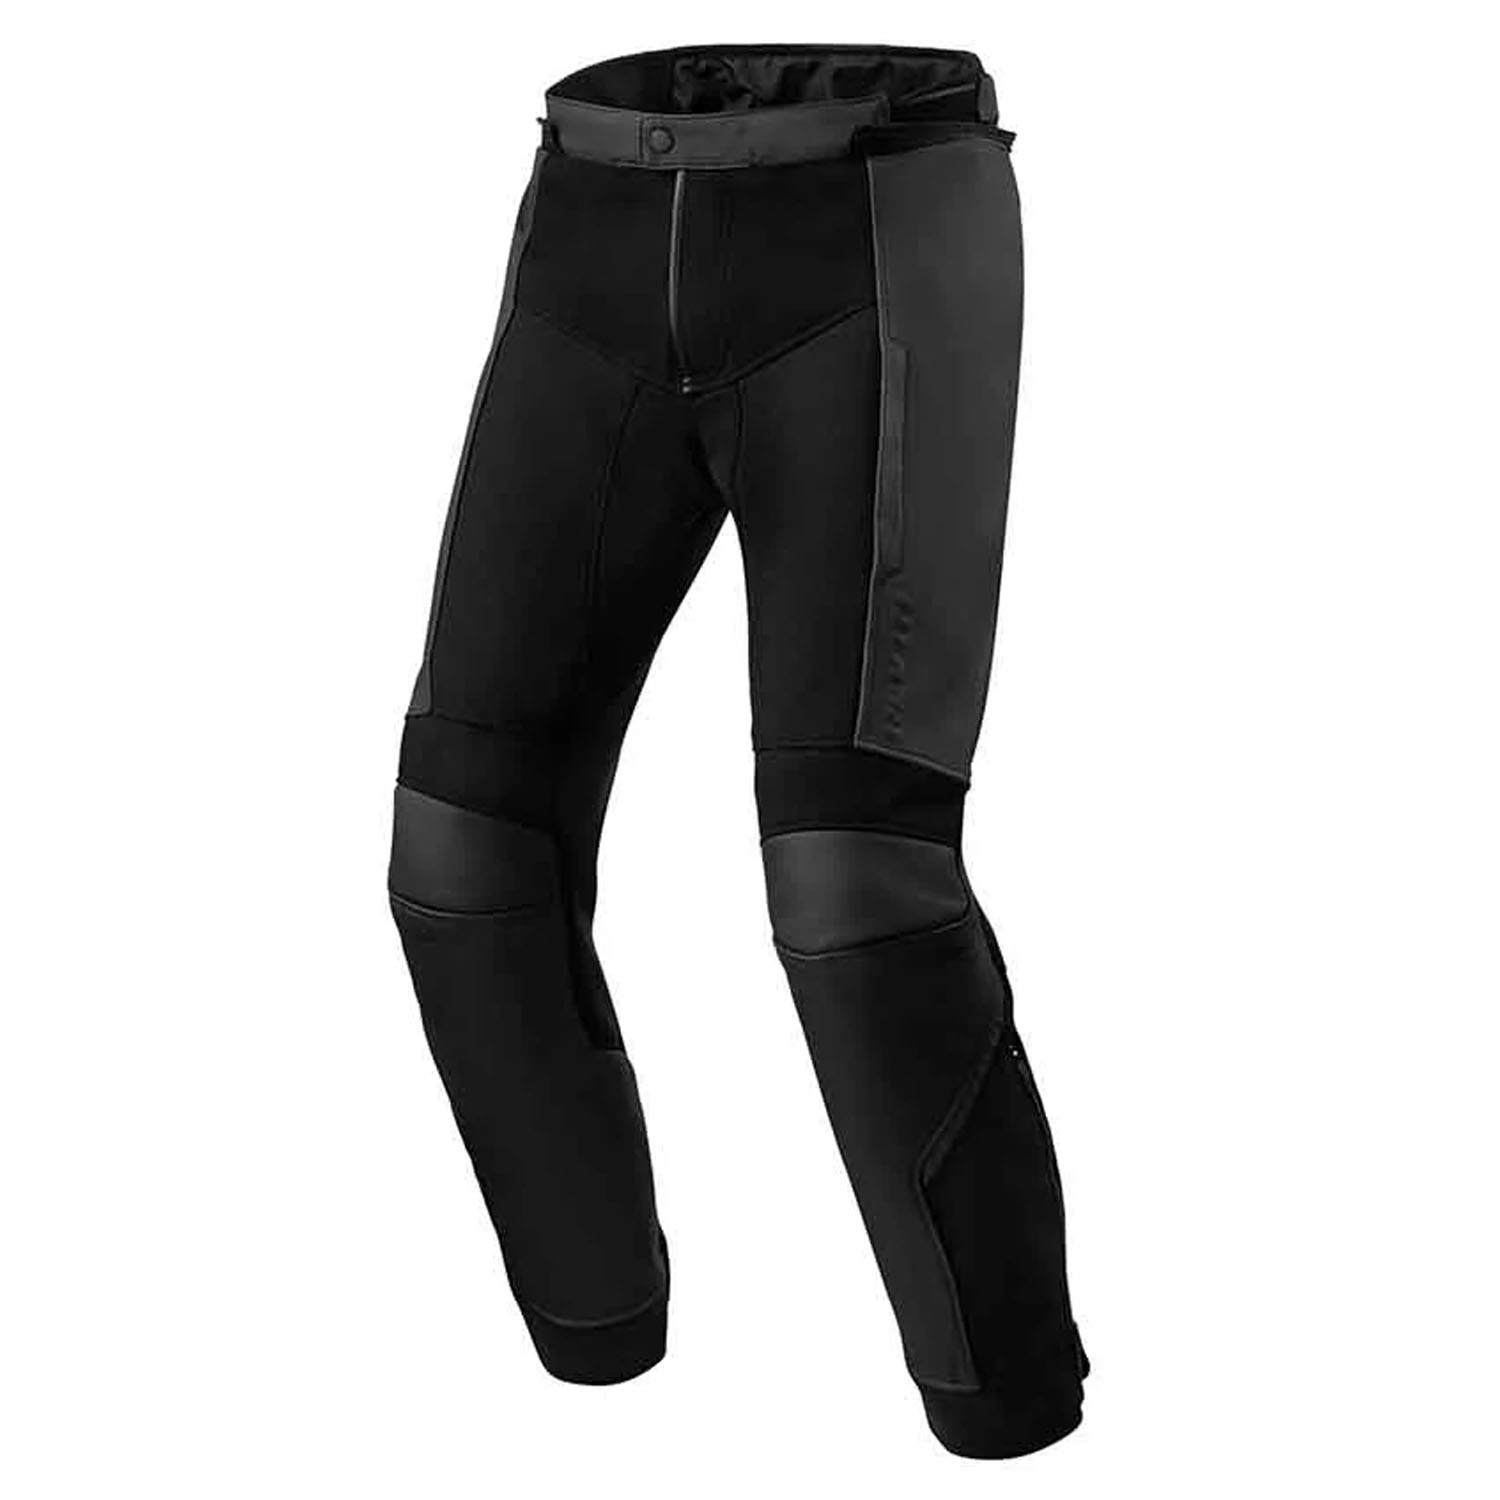 Image of REV'IT! Ignition 4 H2O Black Long Motorcycle Pants Size 50 ID 8700001359412